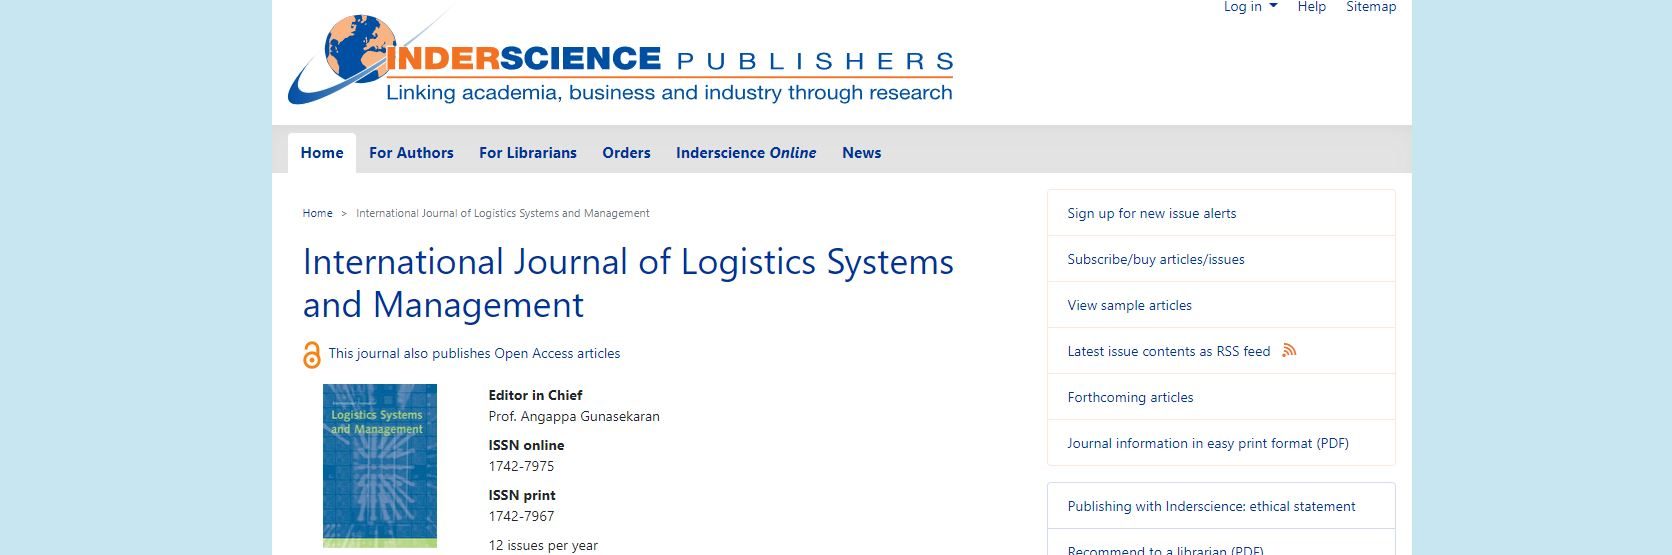 International Journal of Logistics Systems and Management